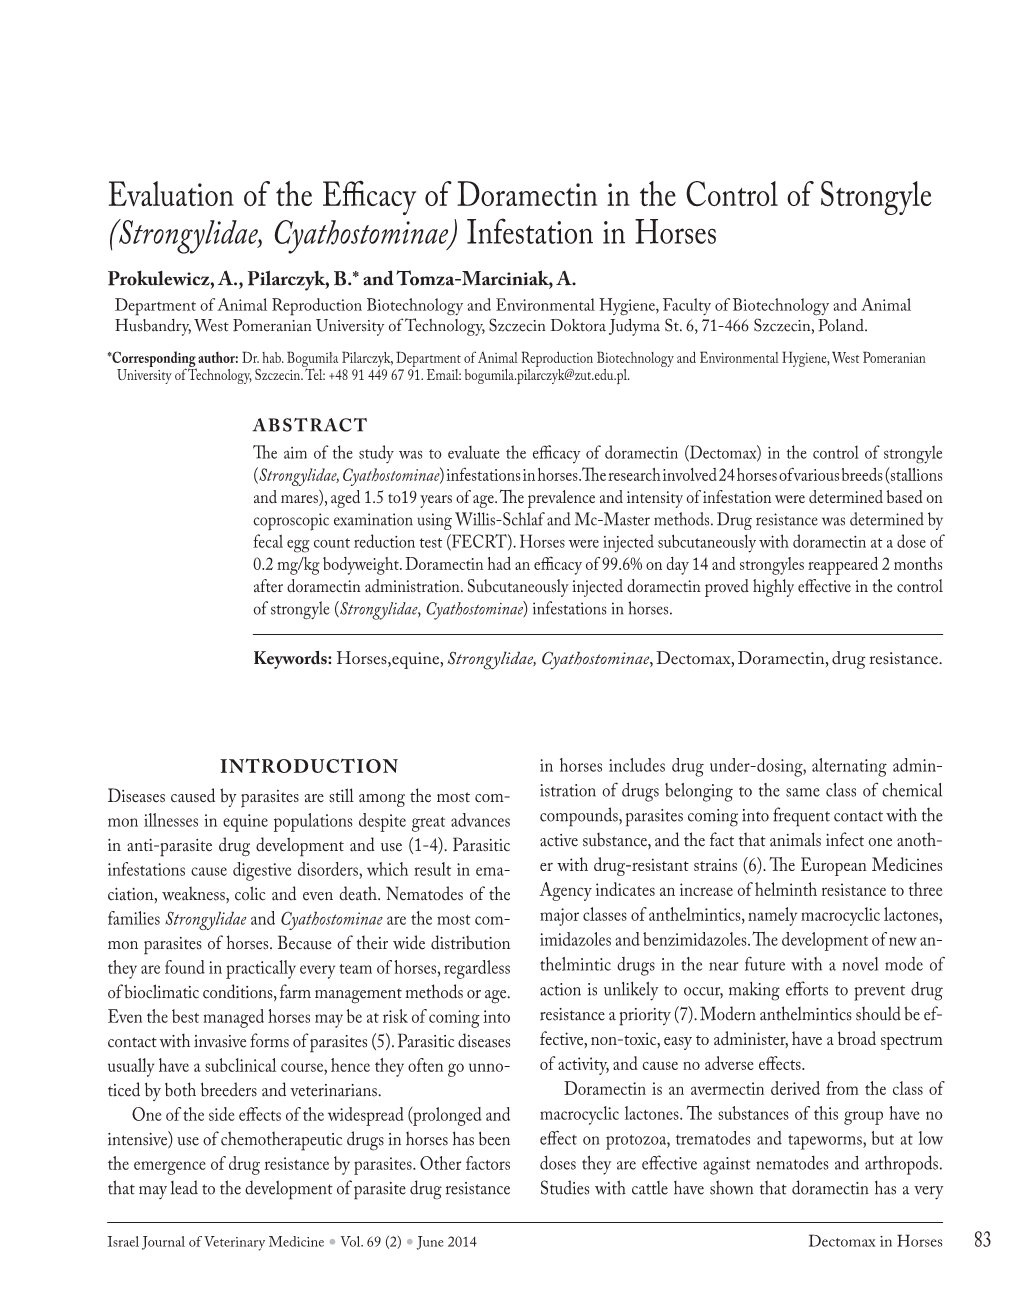 Evaluation of the Efficacy of Doramectin in the Control Of